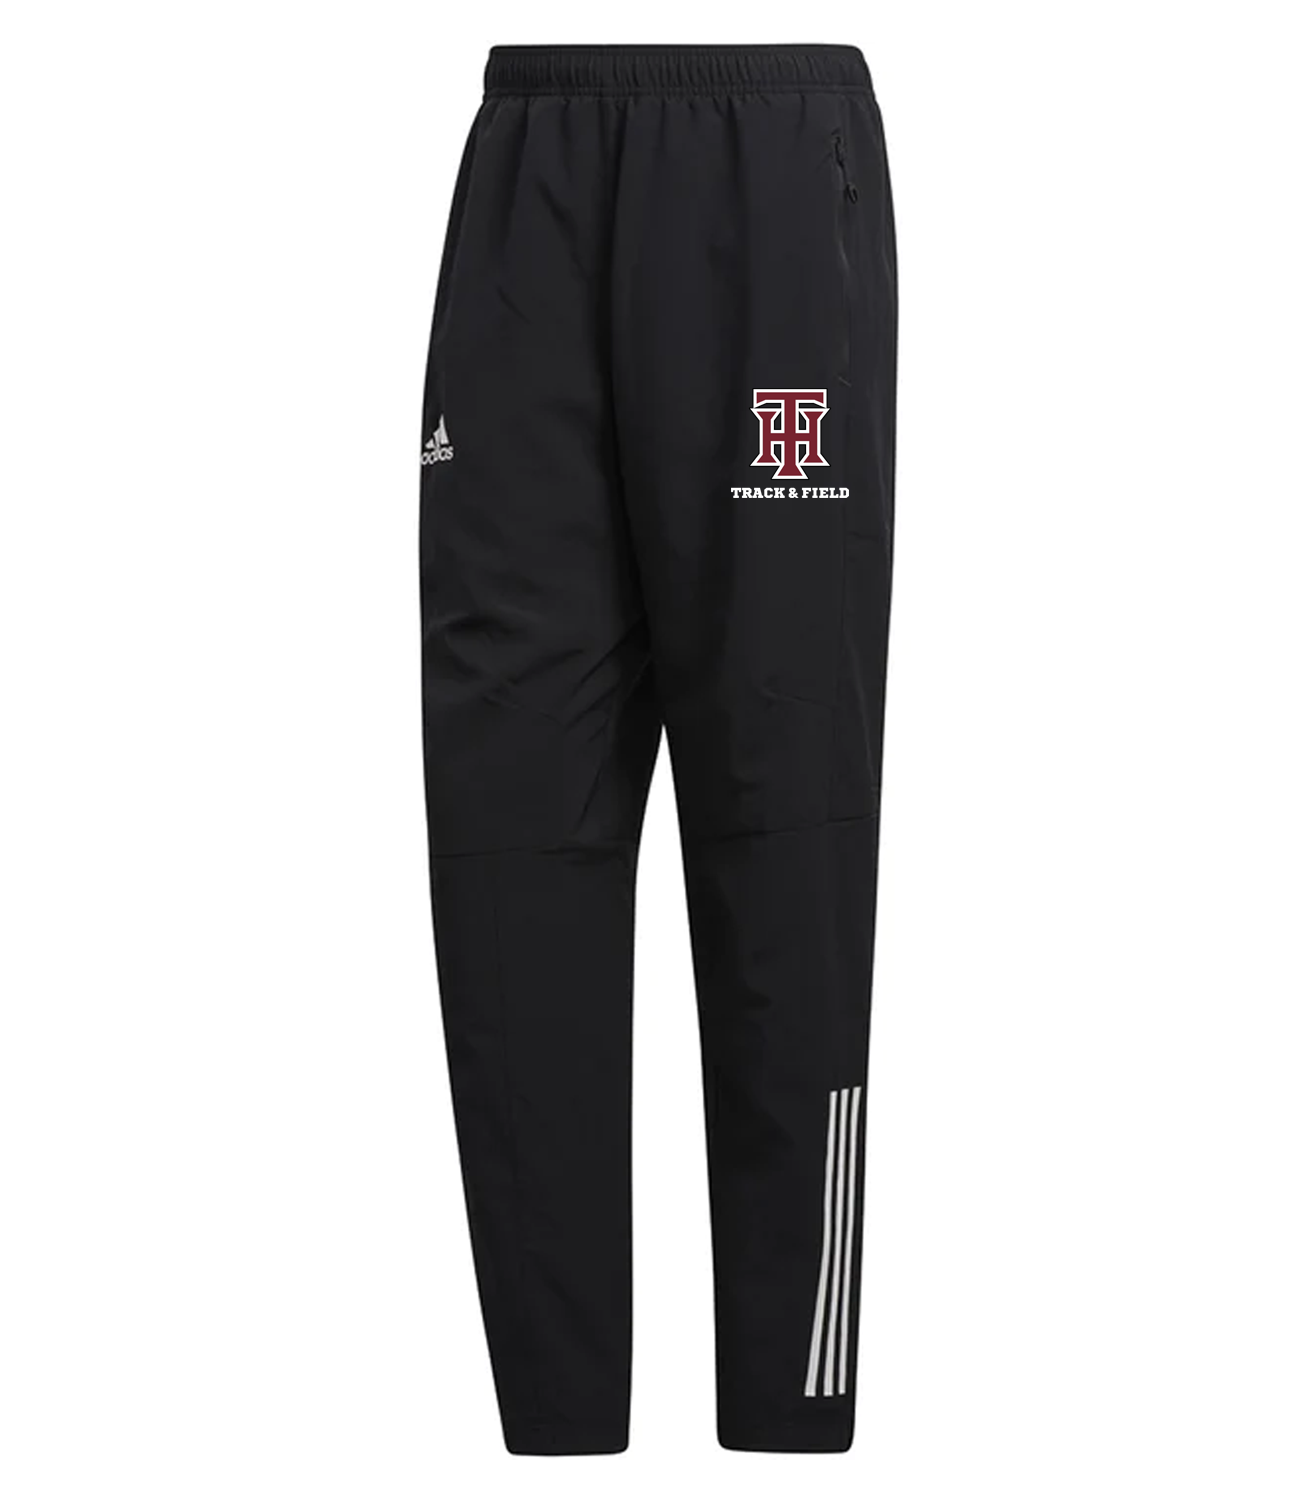 HTHS TRACK & FIELD ADIDAS TRACK PANT